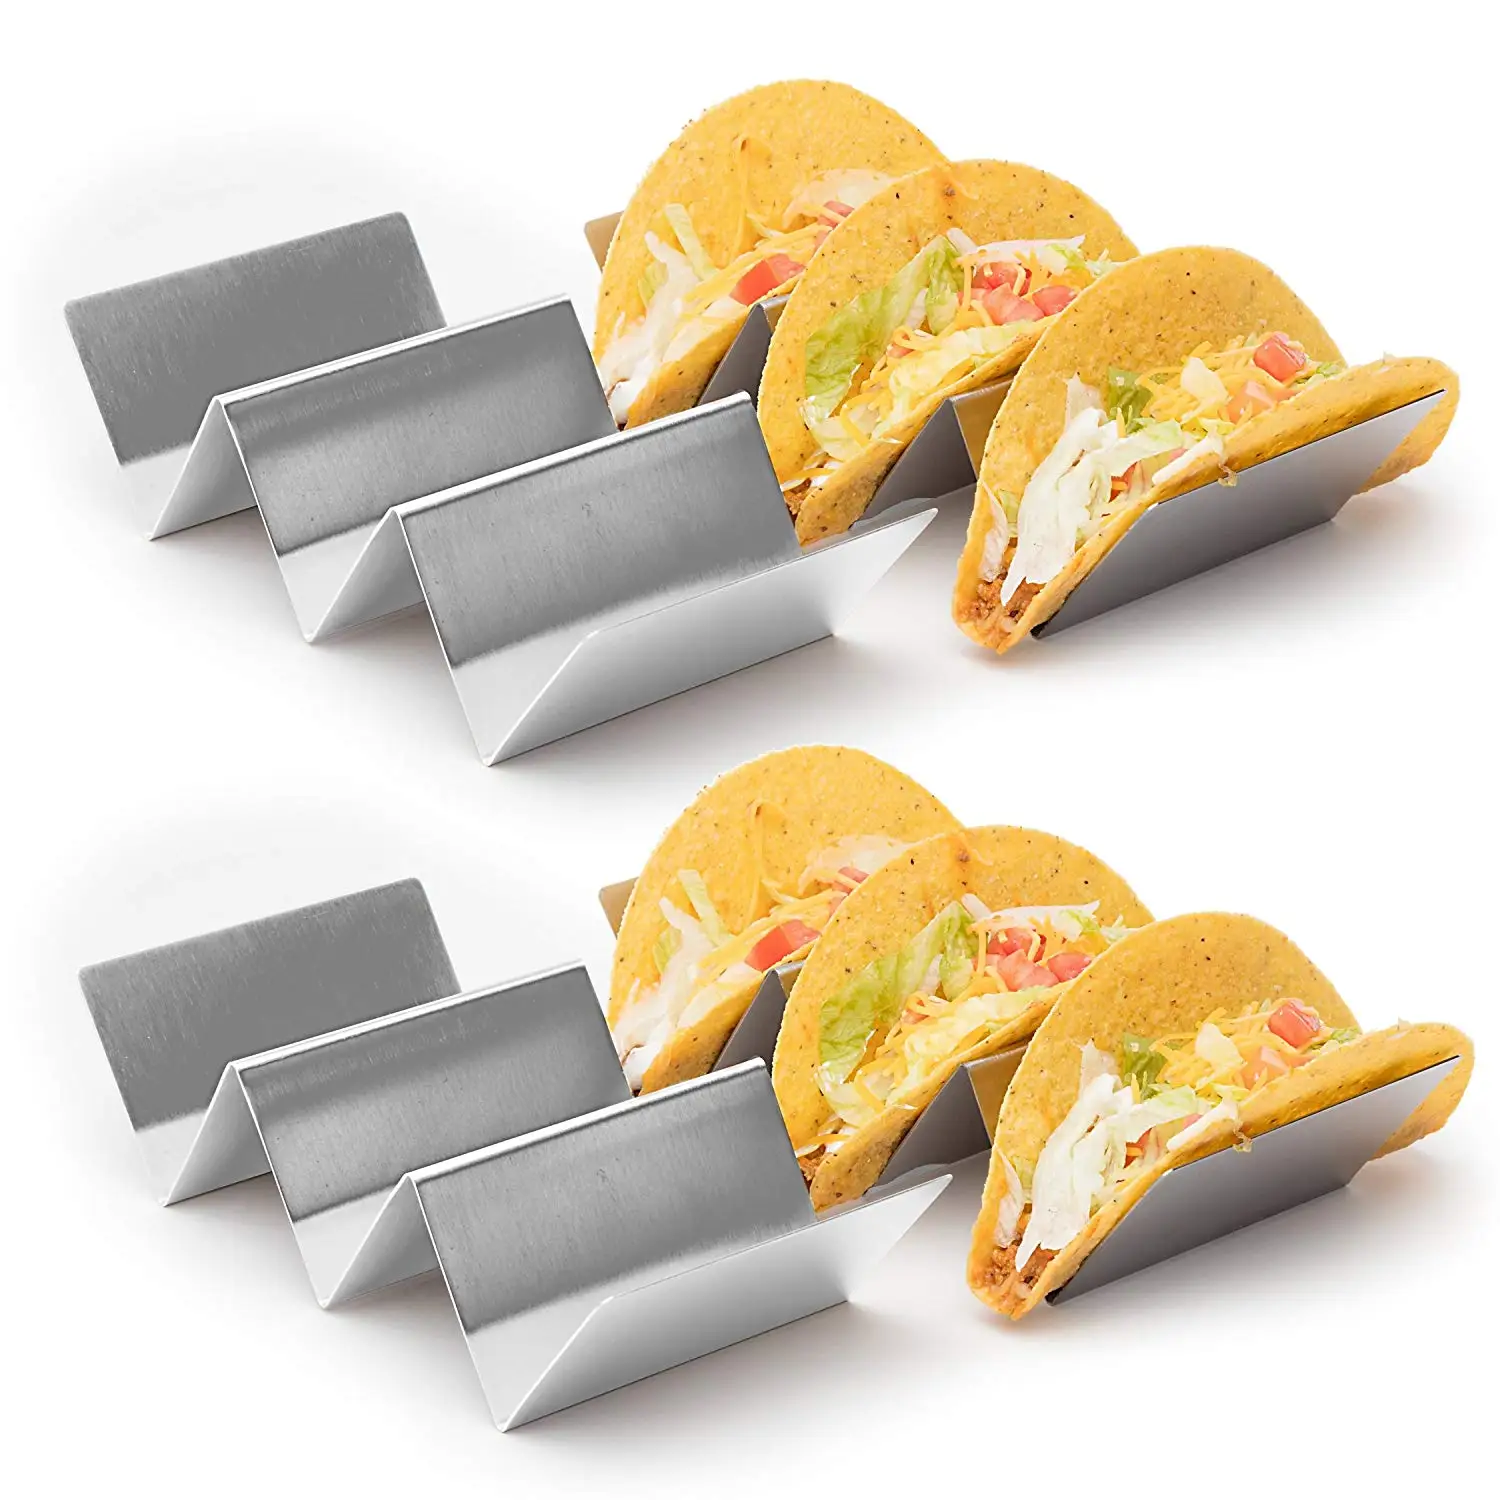 Taco Holder Stainless Steel Set of 3 Taco Stand Holds Up to 2 Tacos Each Dishwasher & Oven Safe 